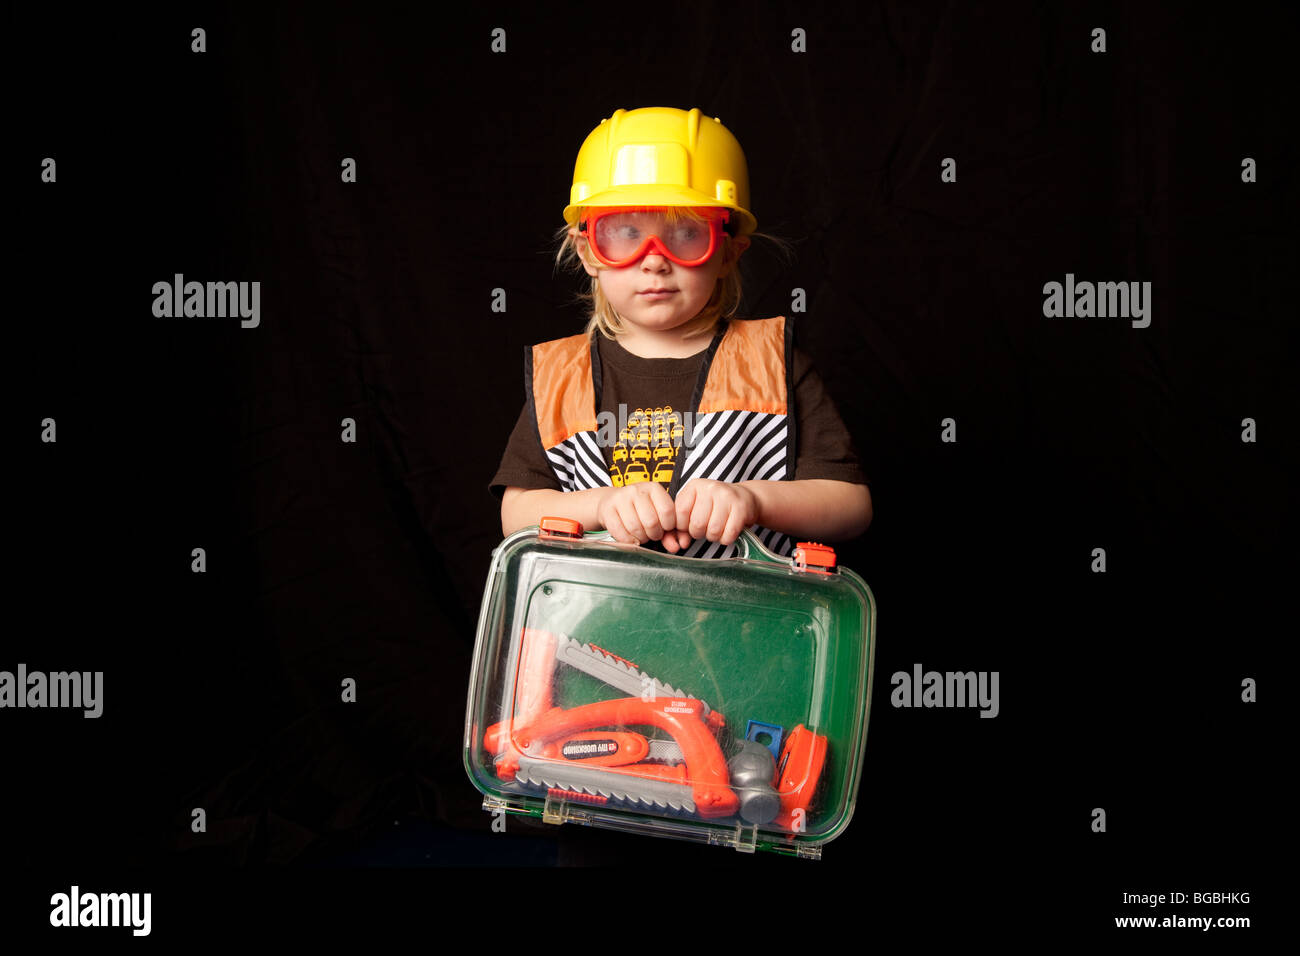 4 to 6 year old child in construction worker costume, holding a plastic tool box with tools in it. Stock Photo